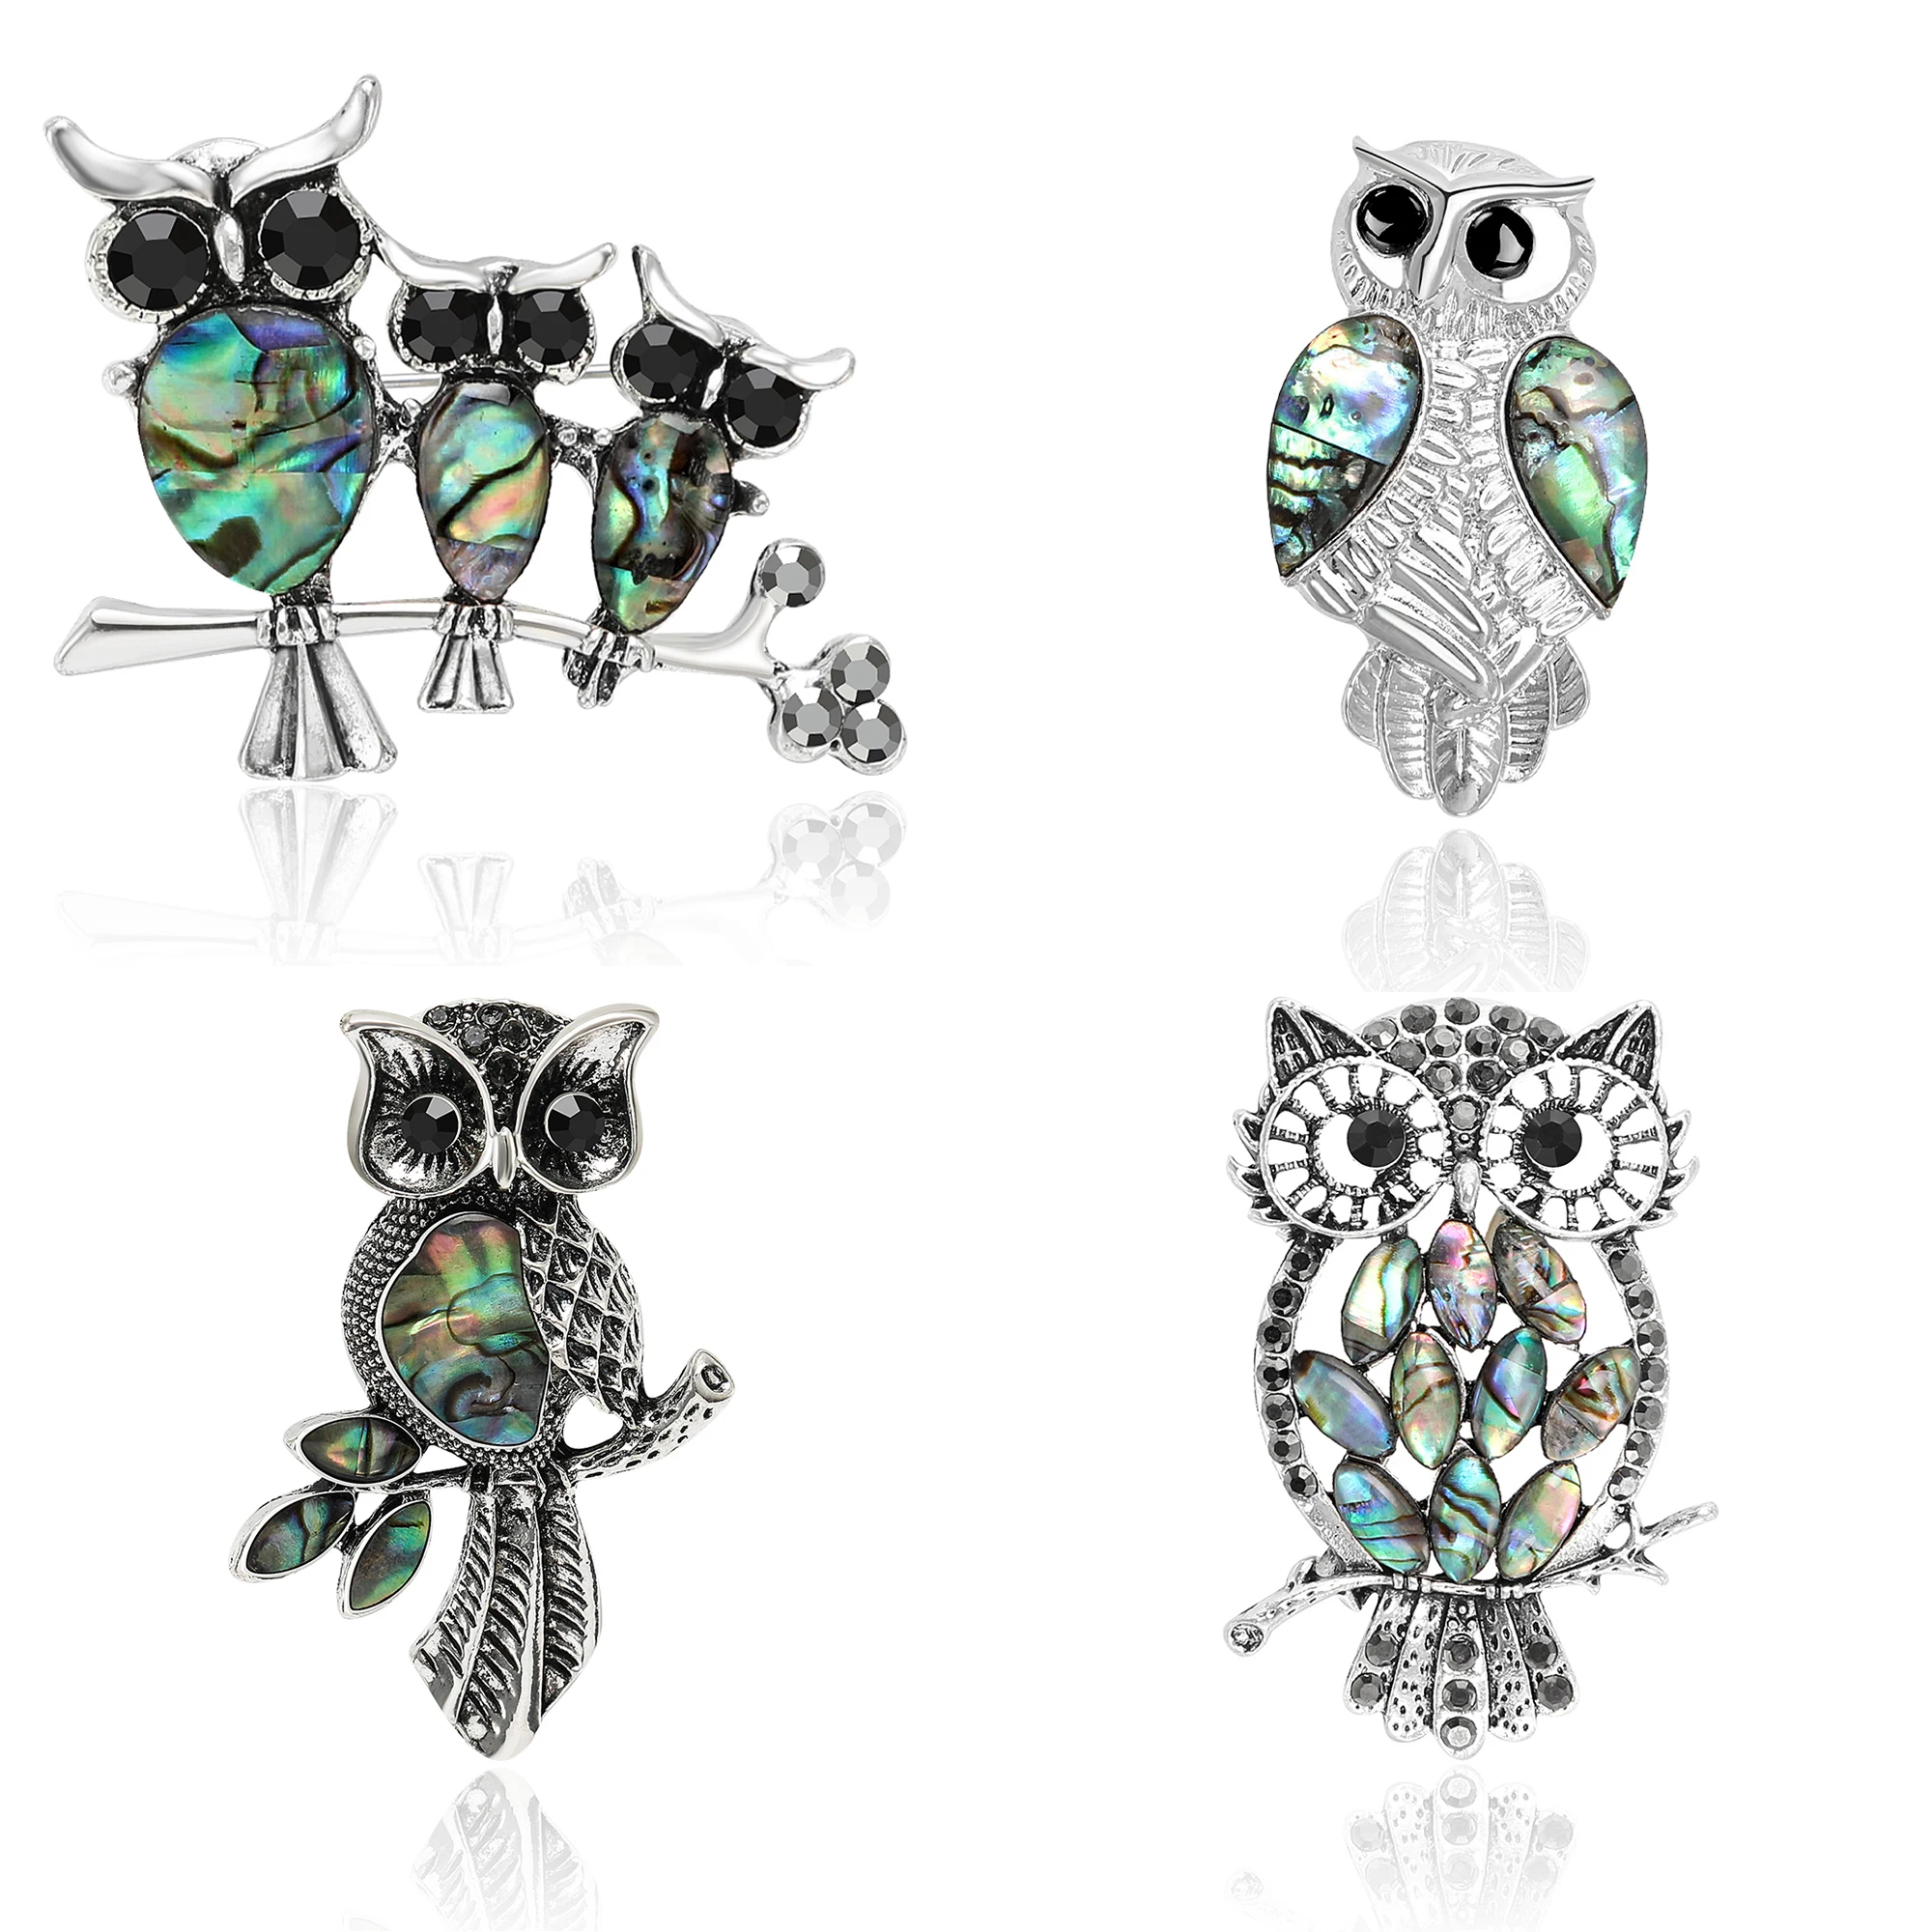 

Shell Owl Brooches for Women Unisex 6 Styles Bird Pins Office Party Friends Gift Accessories